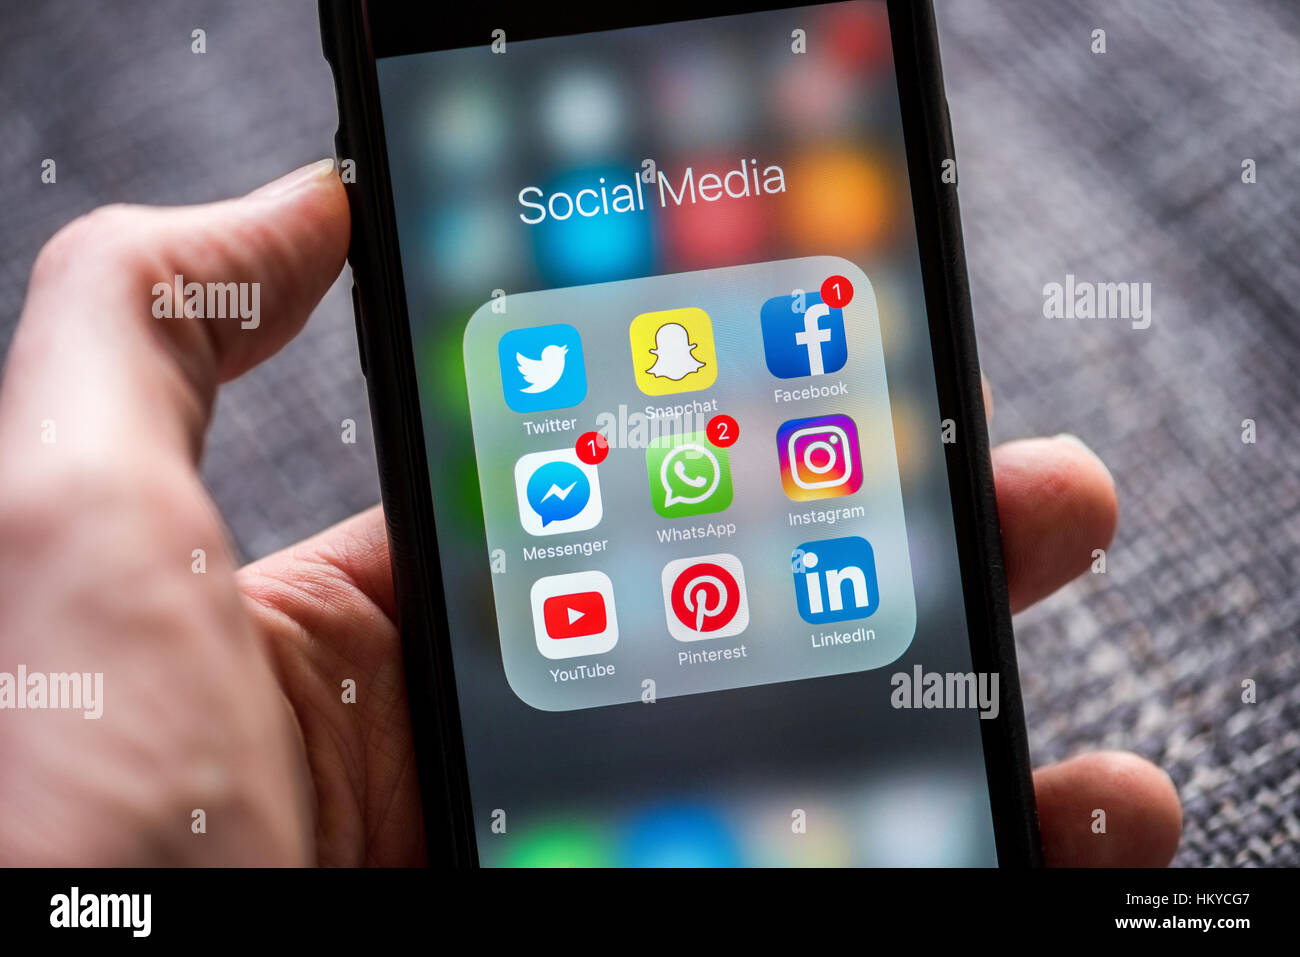 Social media app icons displayed on Apple iPhone Stock Photo, Royalty